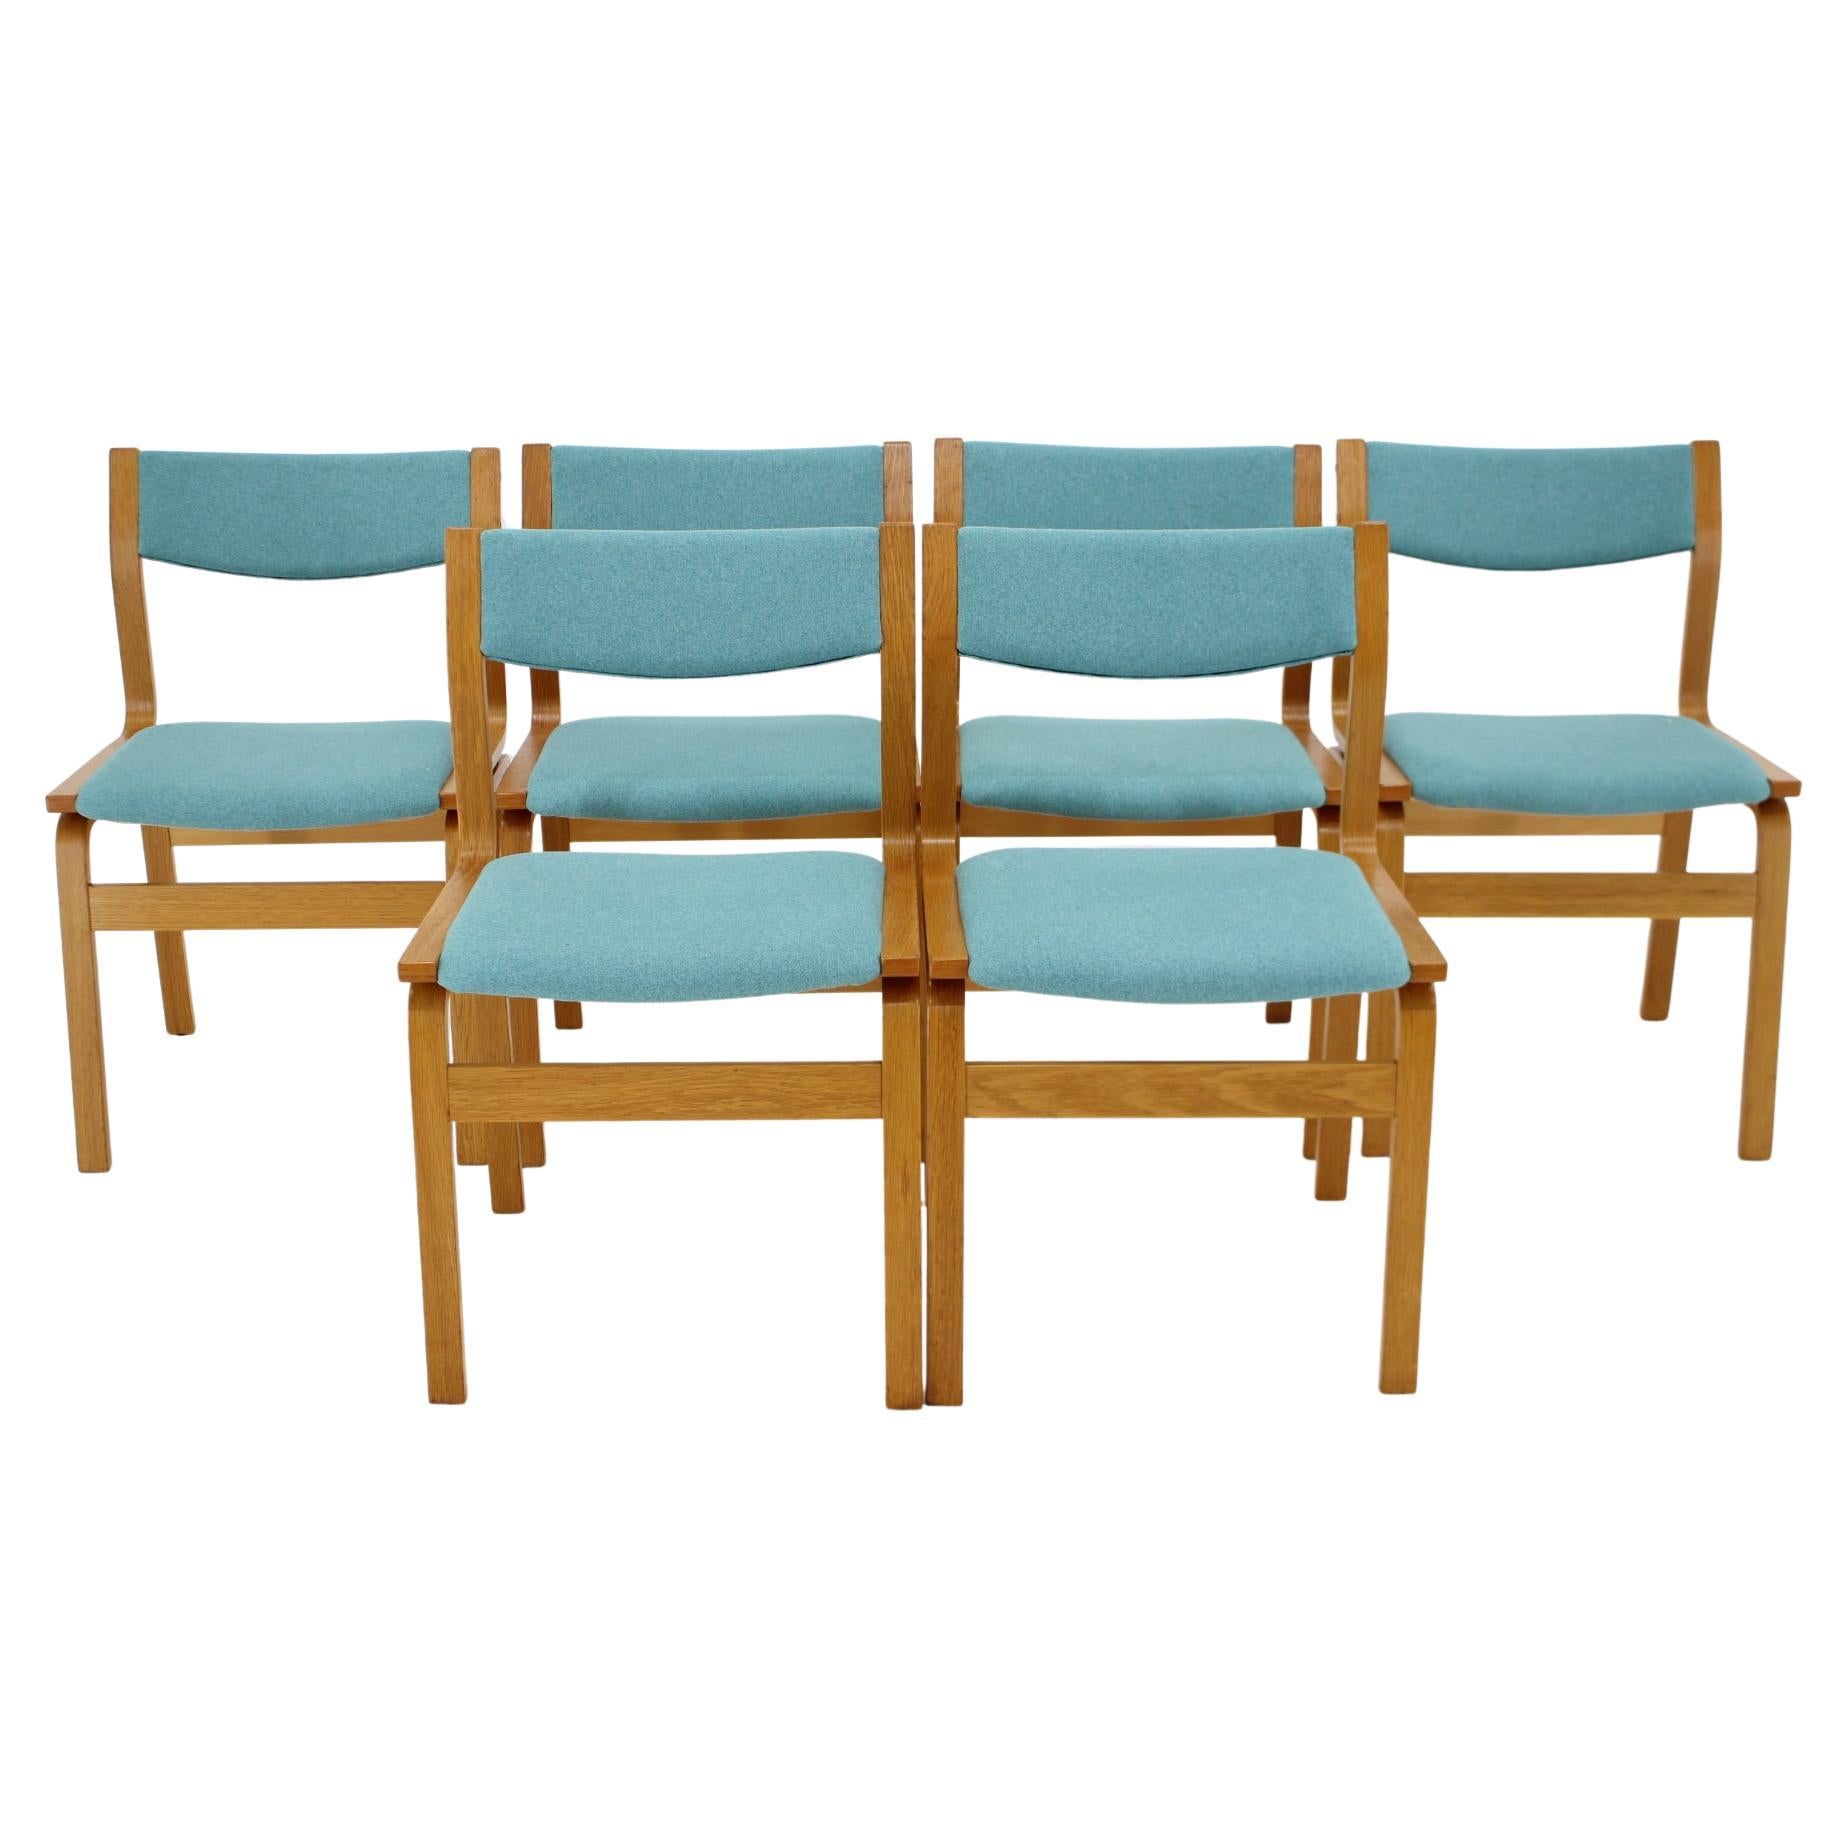 1960s Set of 6 Bentwood Dining Chairs, Denmark